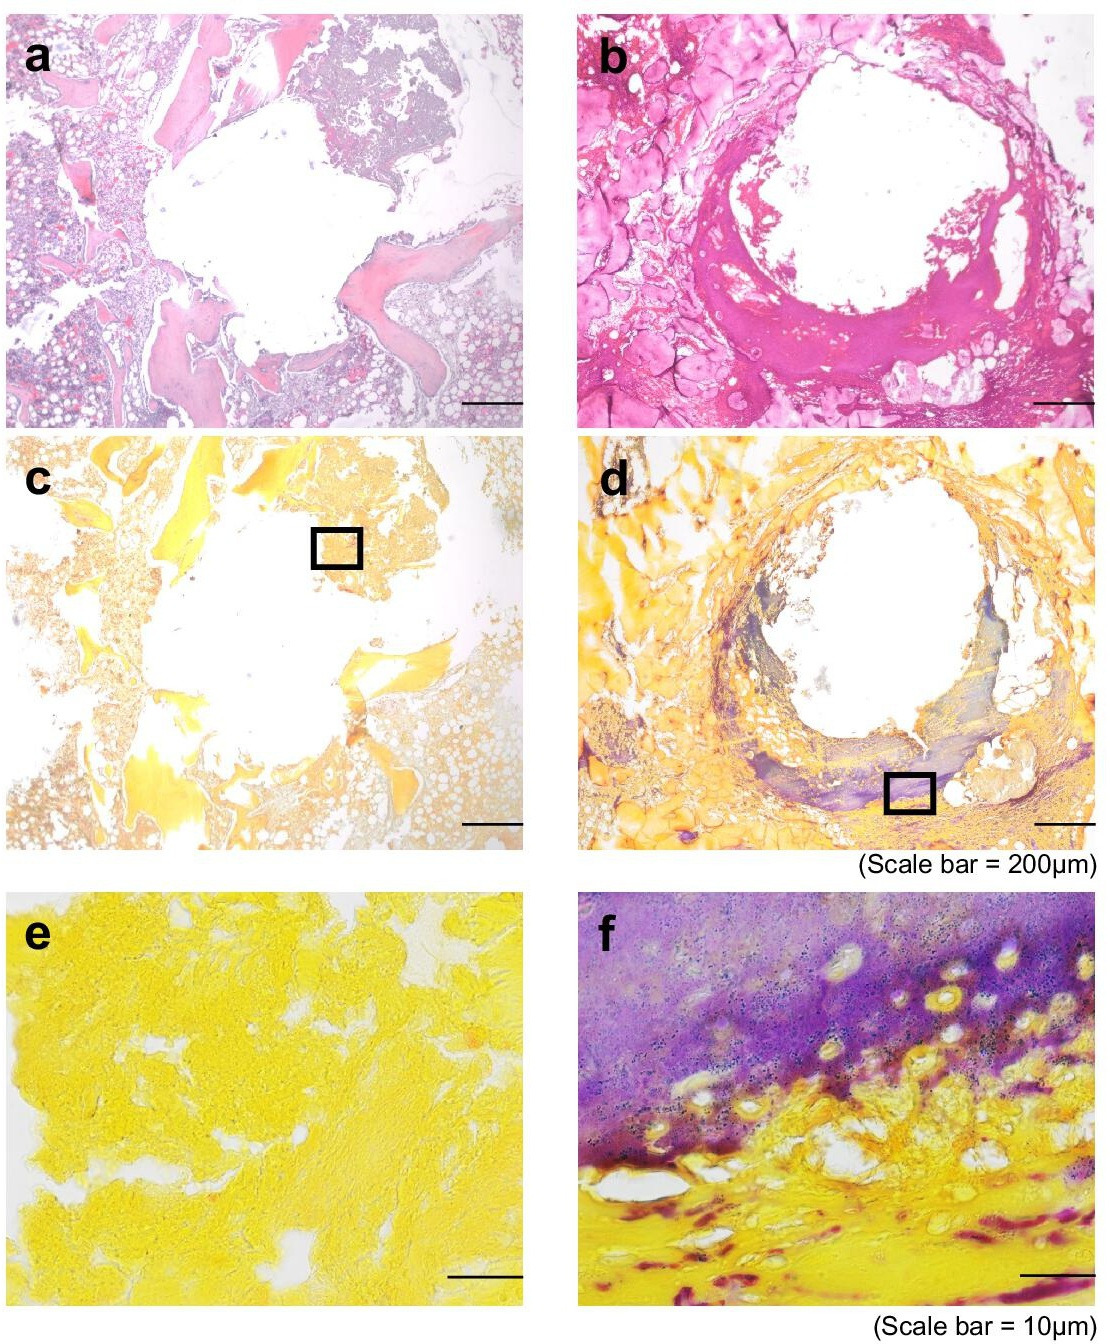 Fig. 5 
            Histological evidence of osteomyelitis. Serial sections from a representative sample in the (a, c, e) control aseptic screw group and (b, d, f) chronic periprosthetic joint infection (PJI) group were stained either with haematoxylin and eosin (H&E) (a, b) and imaged at 40× (scale bar = 200 μm), or with Gram’s stain (c-f) imaged at 40× (c, d; scale bar = 200 μm) or 100× (e,f; scale bar = 10 μm).
          